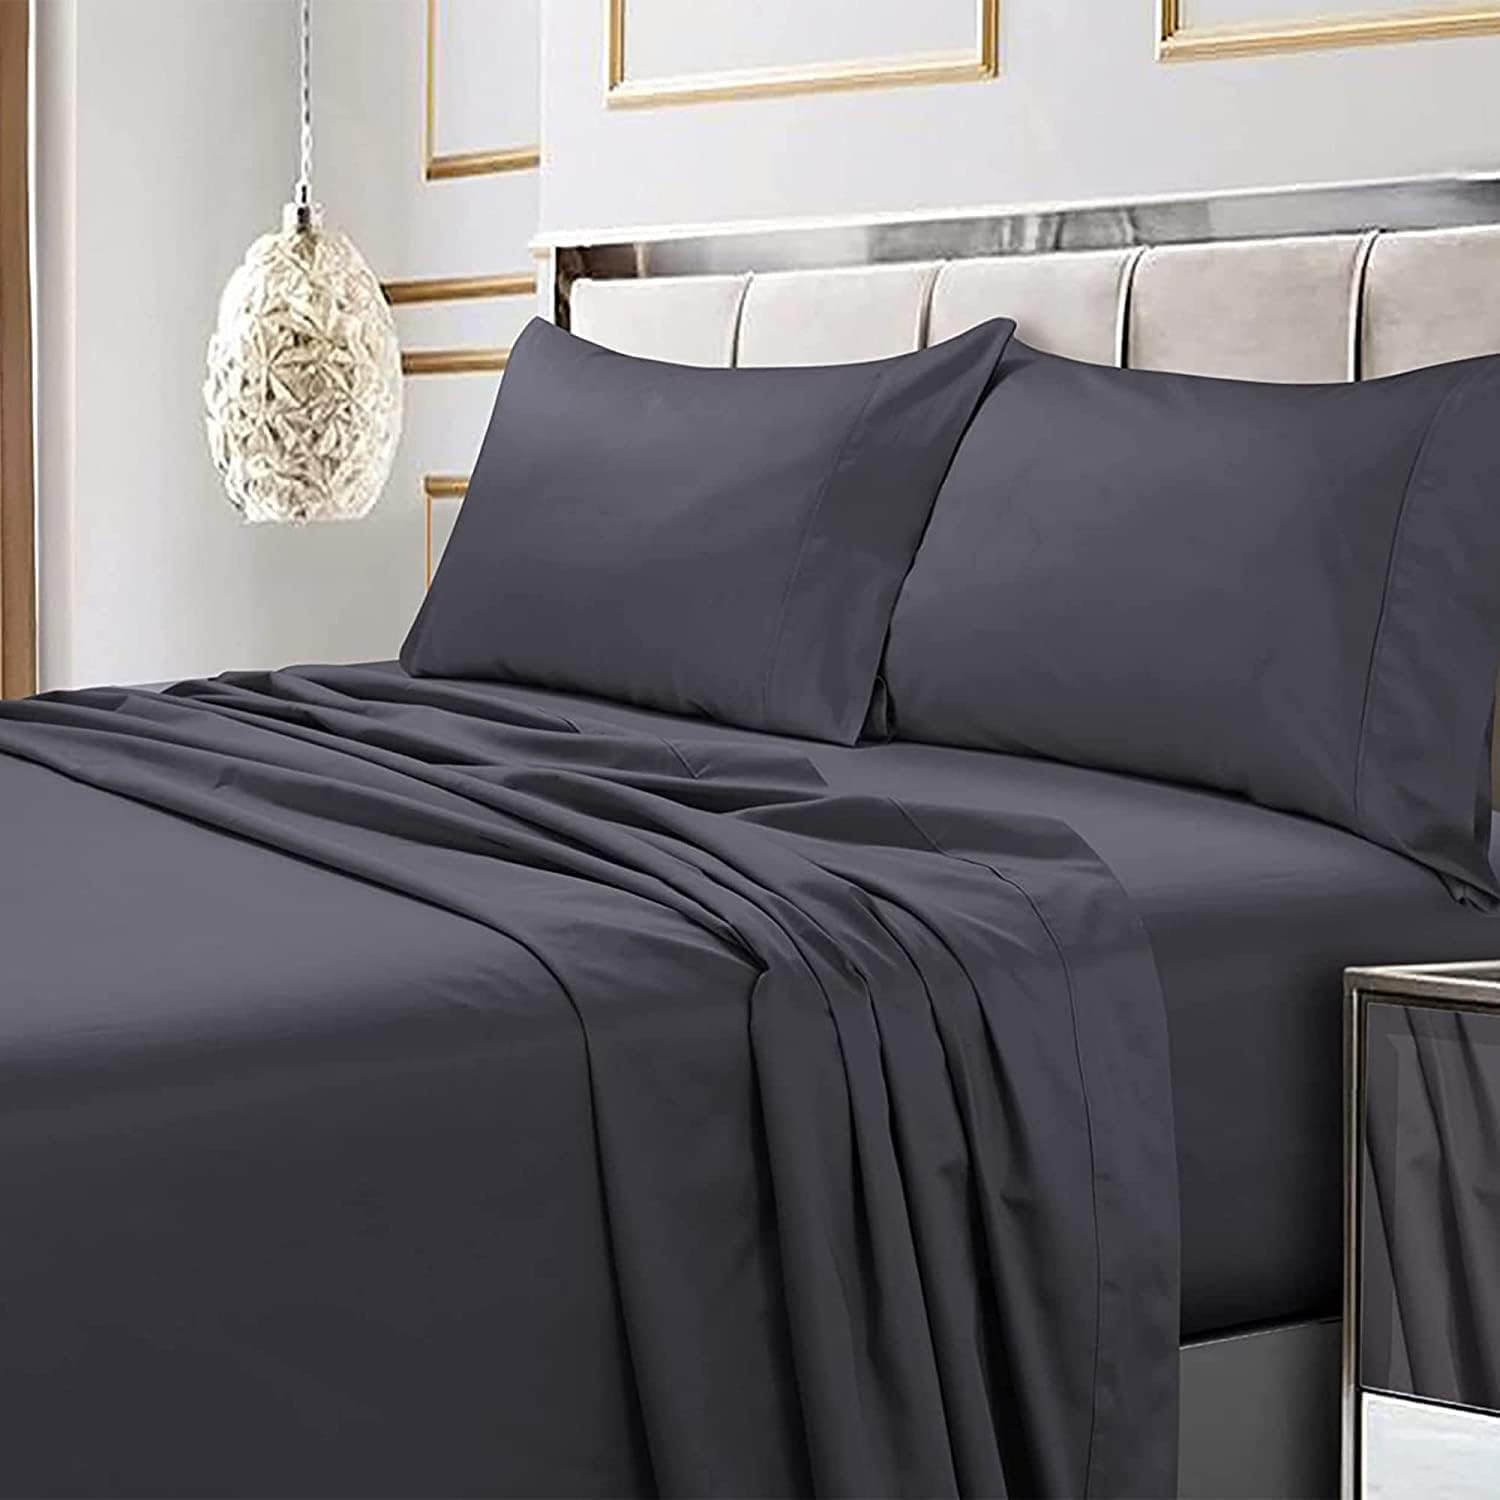 Tribeca Living Bed Soft Egyptian Cotton Sateen Solid Sheets and Pillowcase Set, Deep Pocket, 600 Thread Count, Queen, Steel Grey